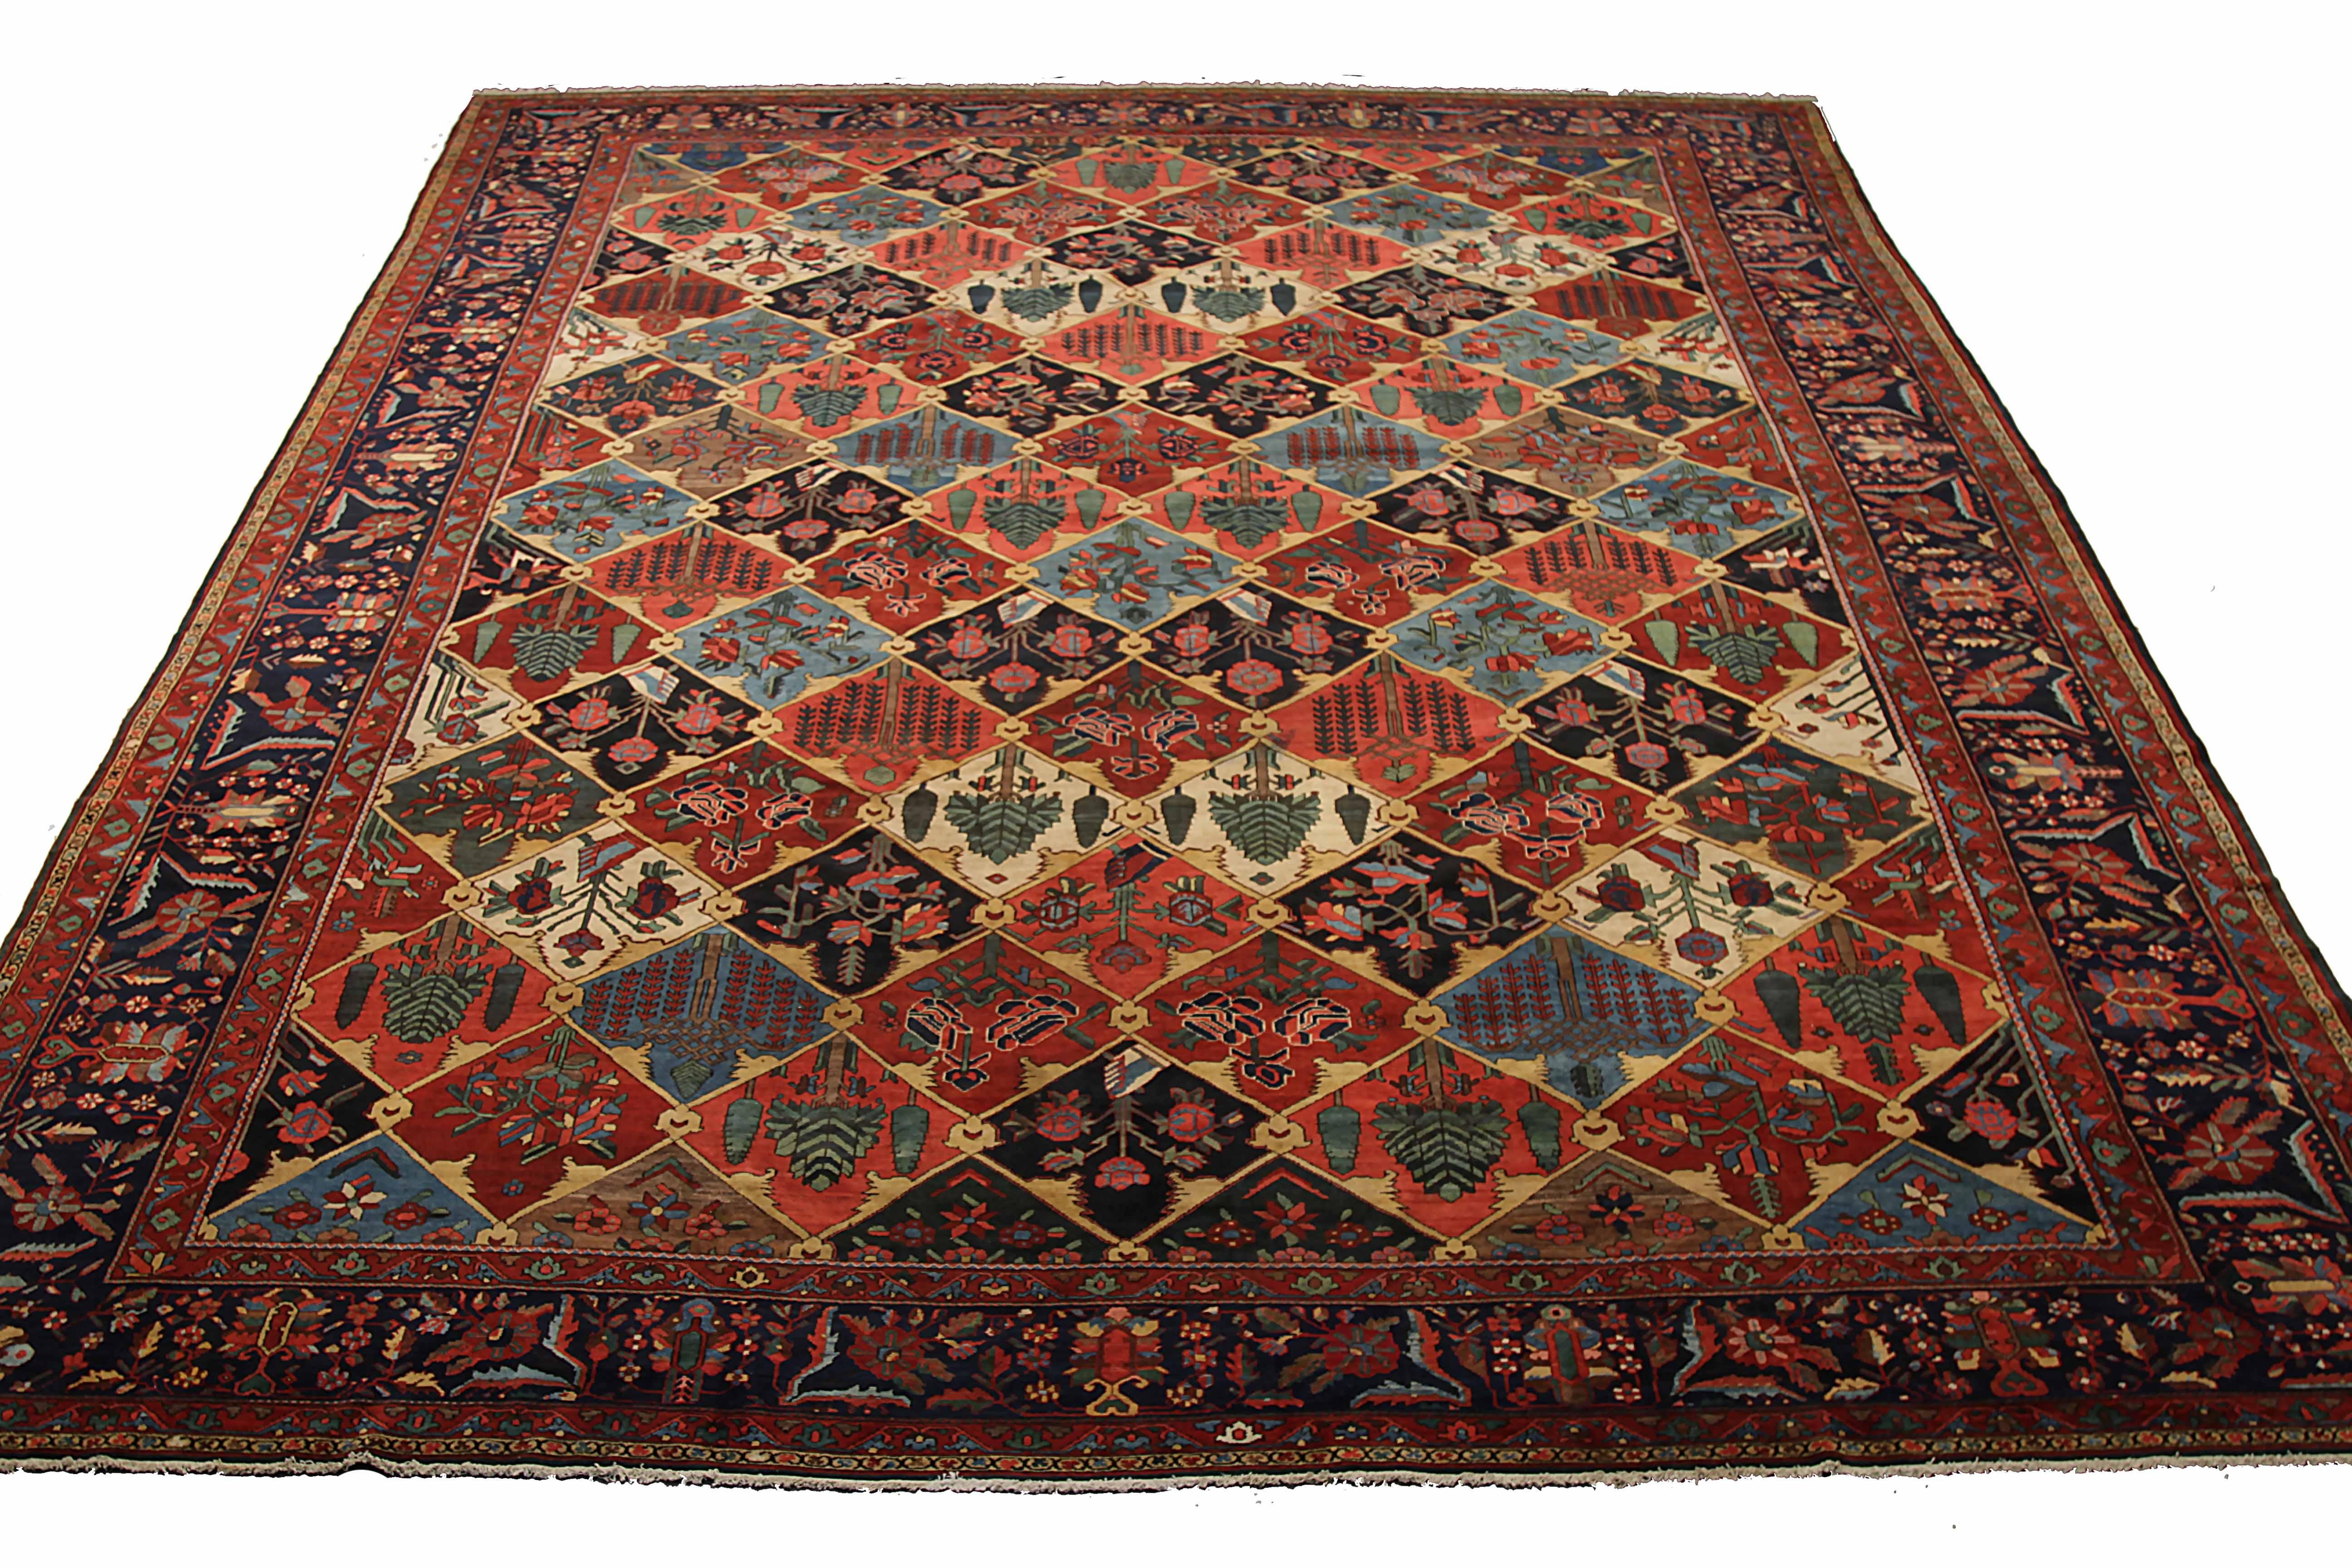 Antique area rug handwoven from the finest sheep’s wool. It’s colored with all-natural vegetable dyes that are safe for humans and pets. It’s a traditional Bakhtiar design handwoven by expert artisans. It’s a lovely area rug that can be incorporated